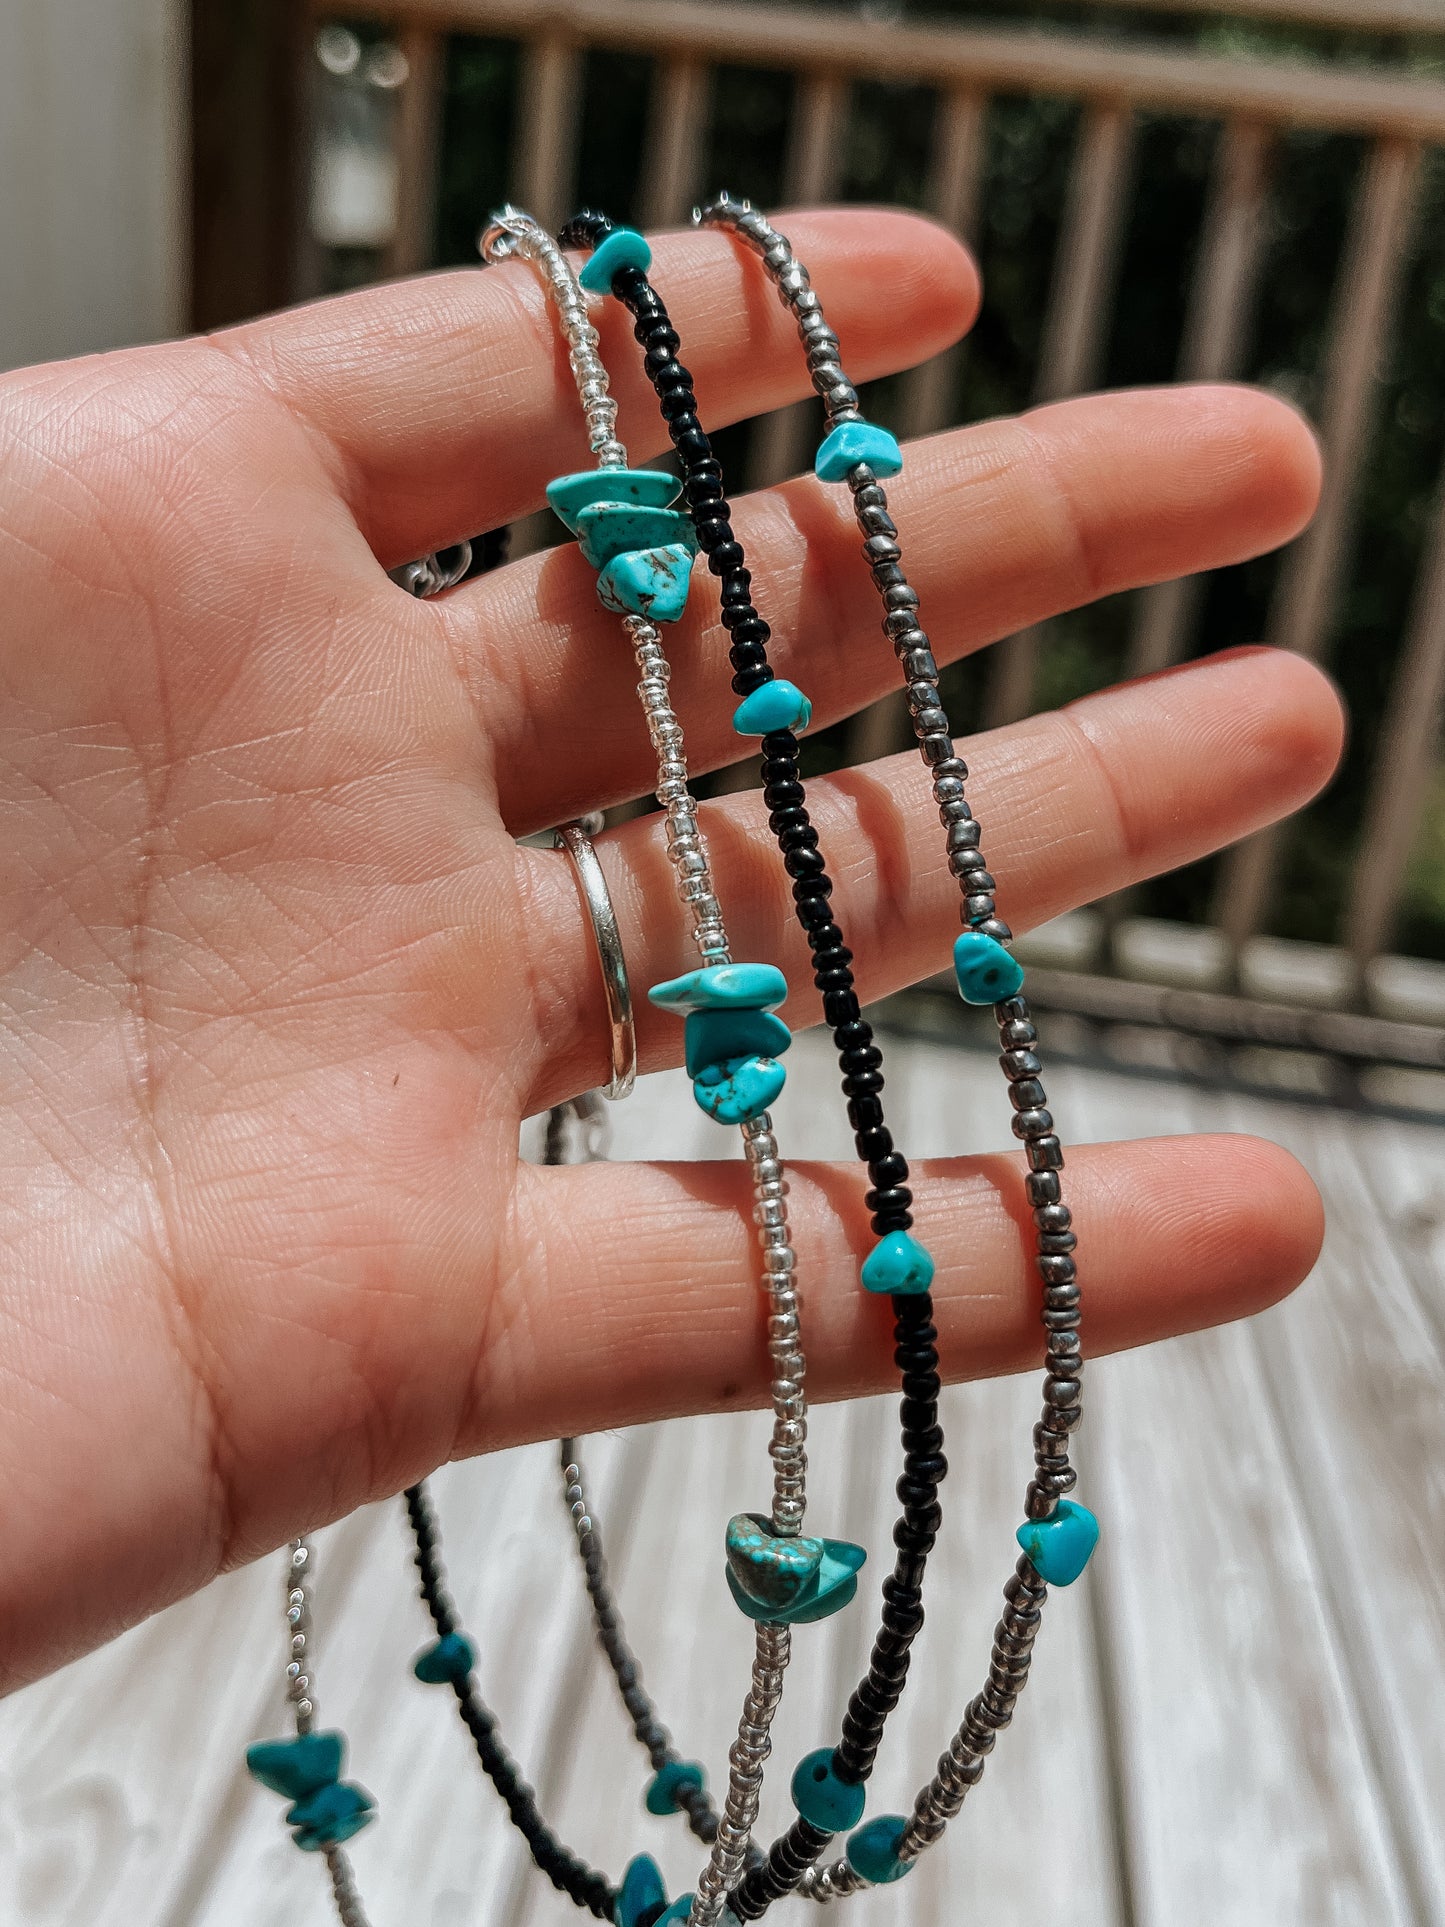 The Turquoise and Beads Choker